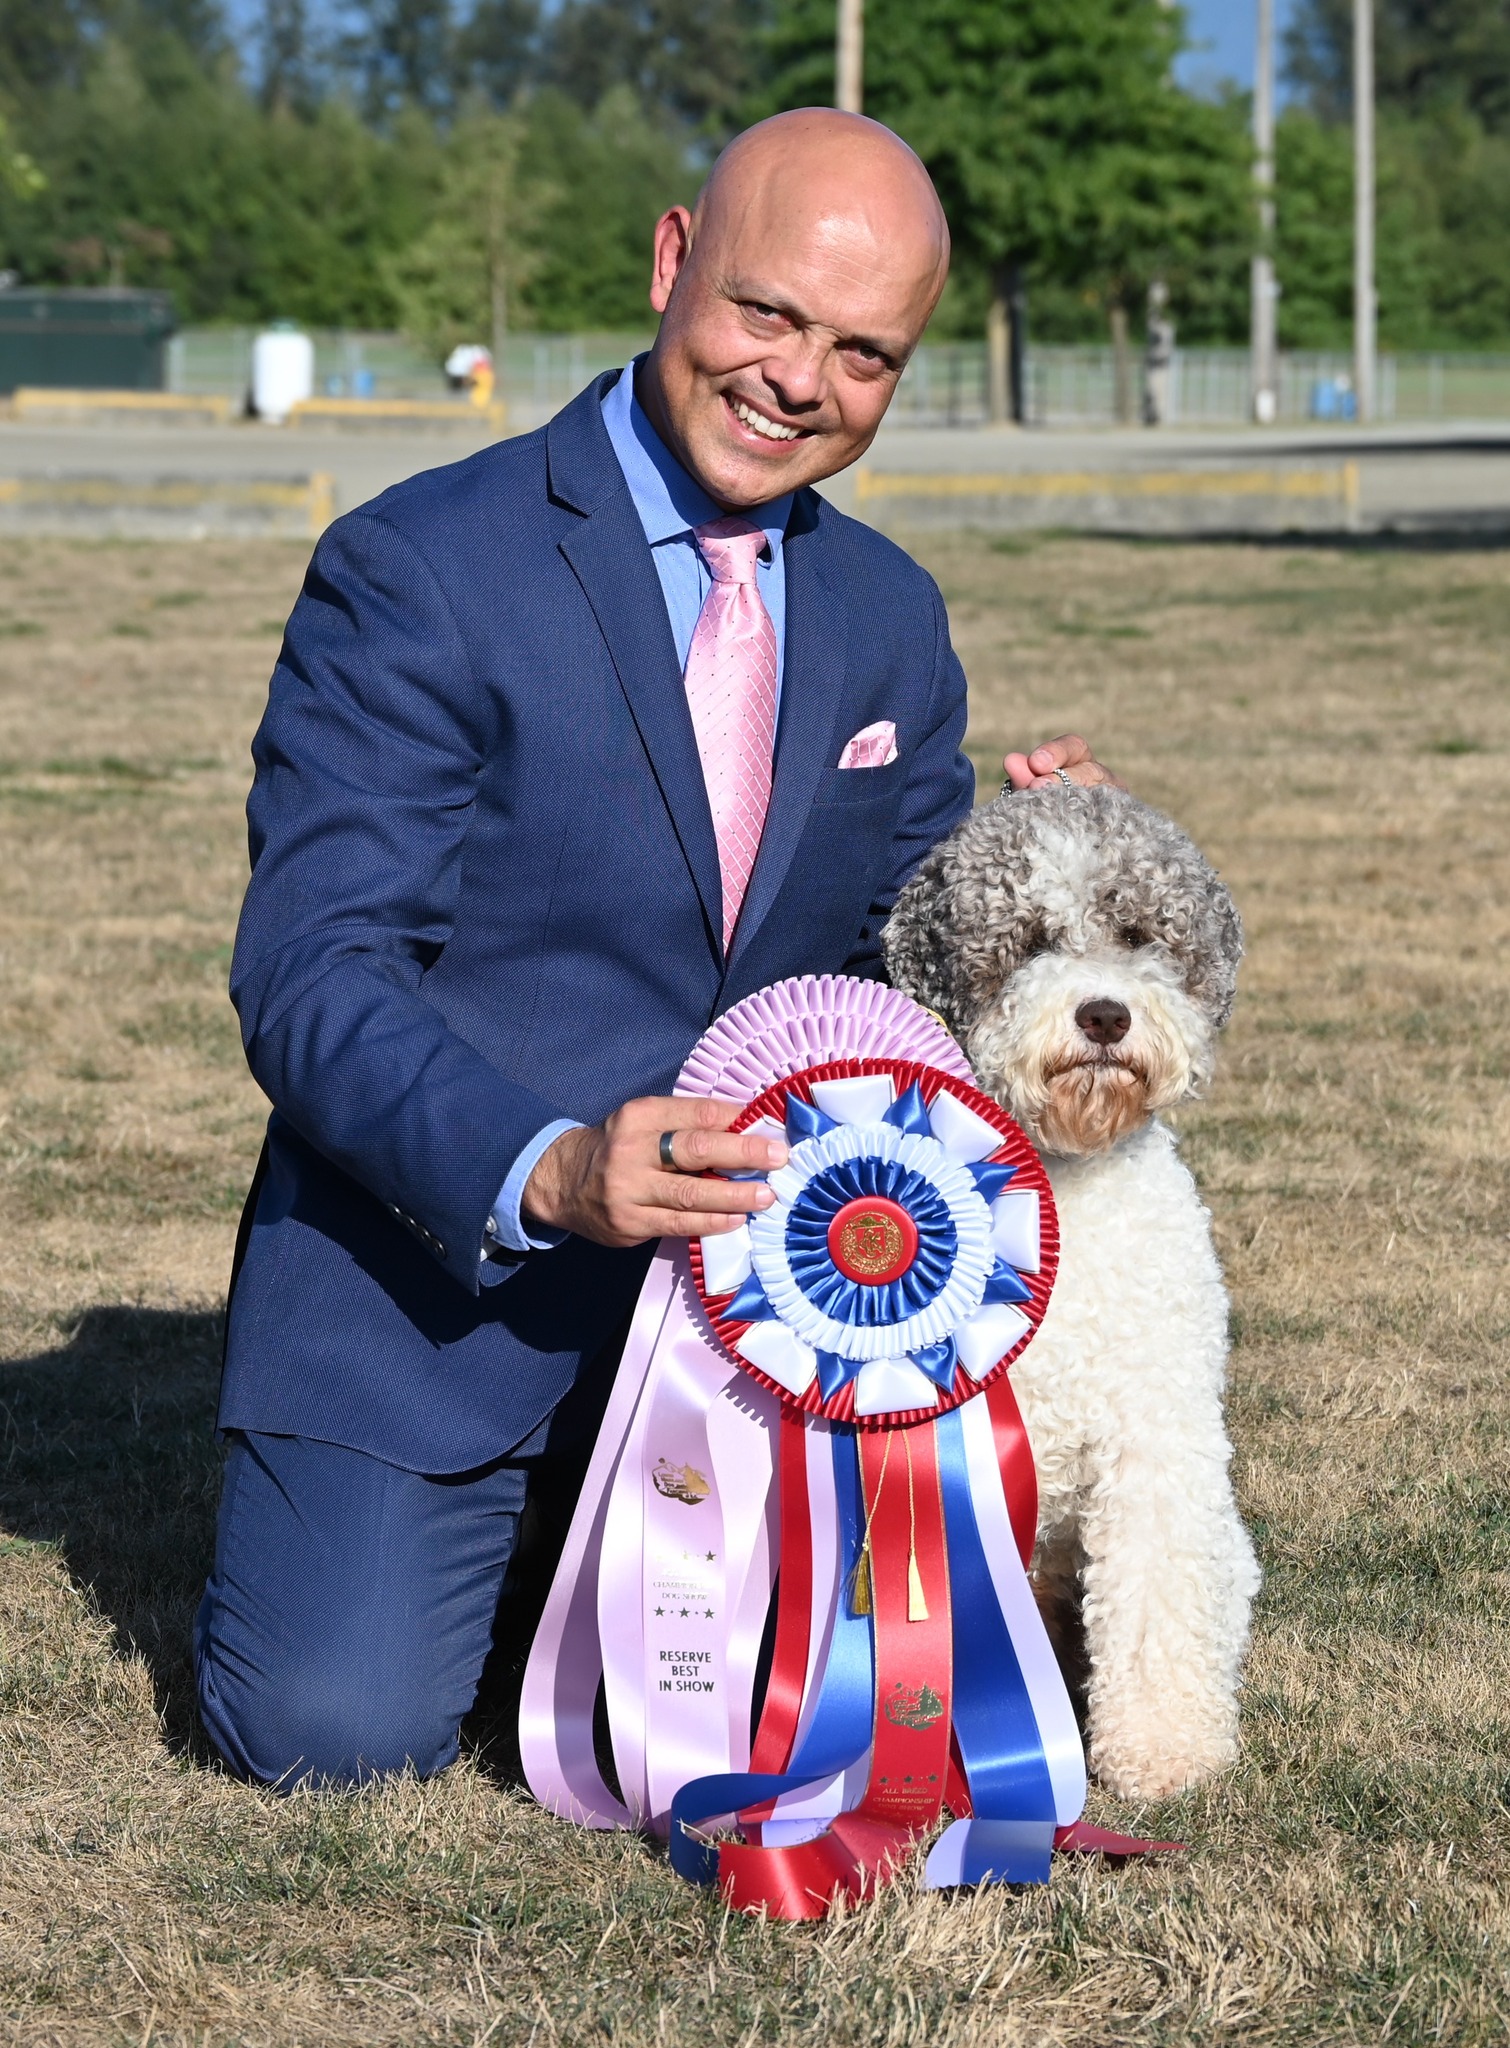 Basil the Lagotto Romagnolo wins Best in Show